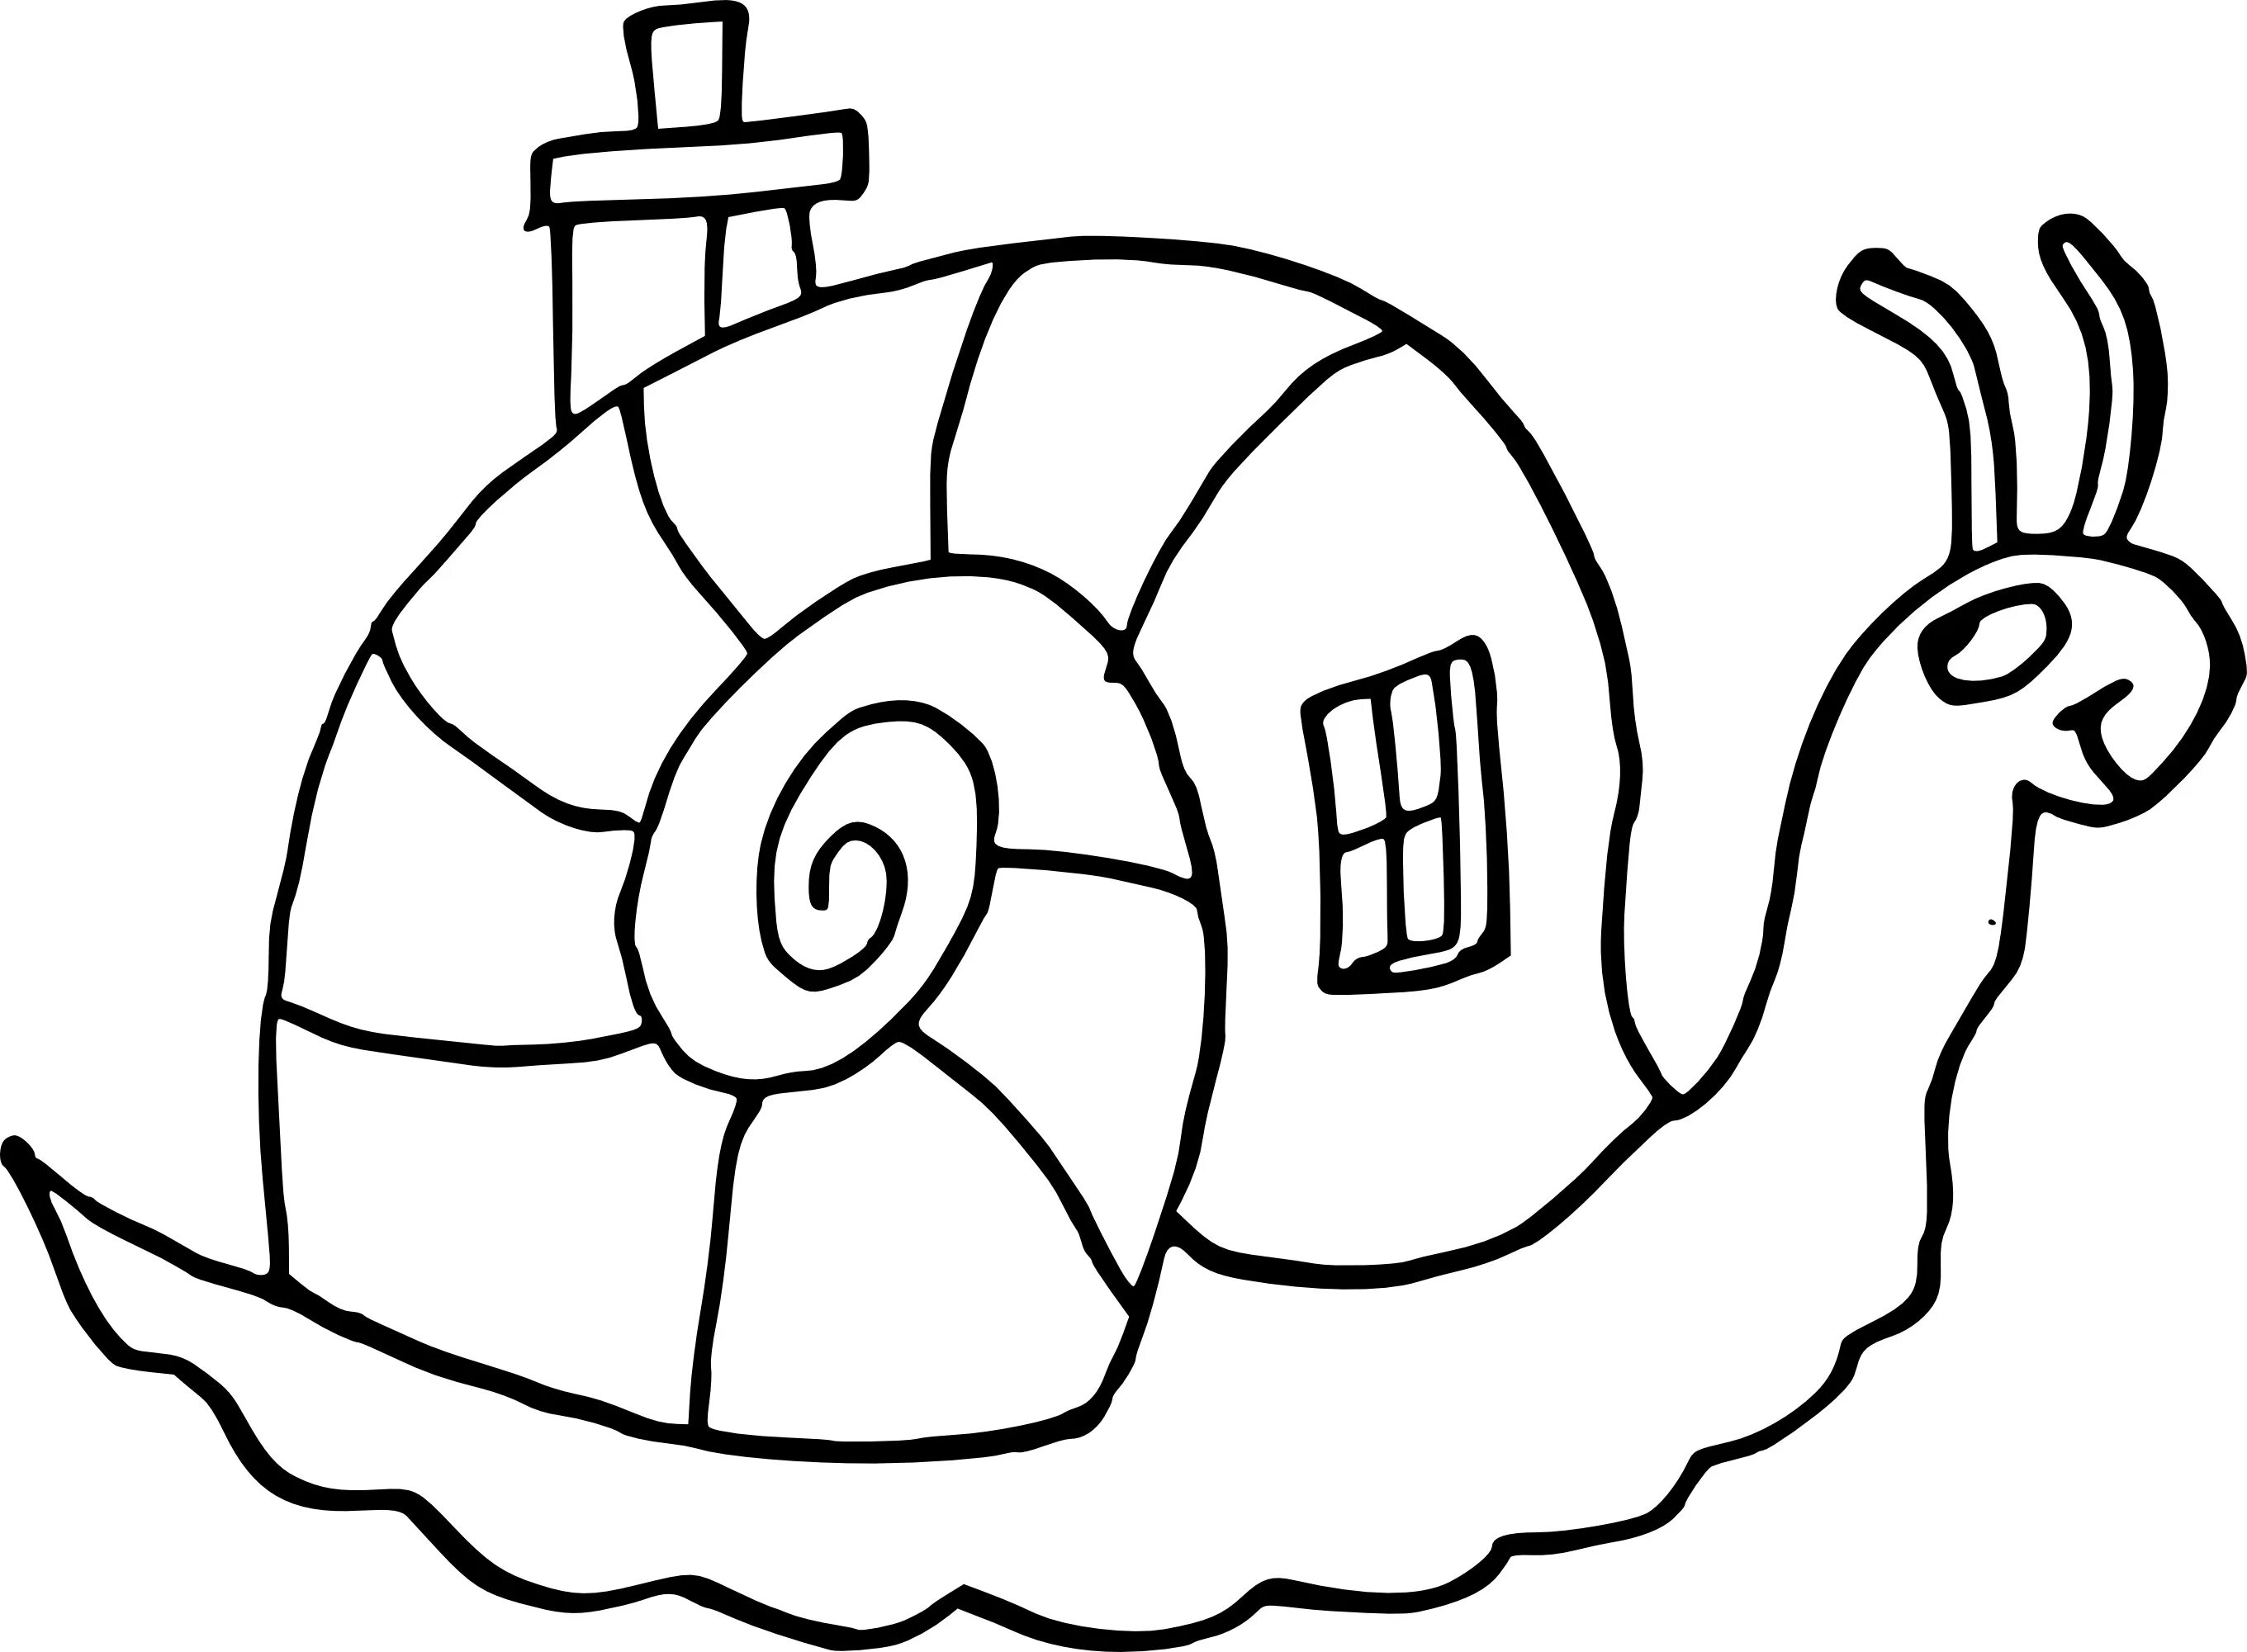 Fancy snail coloring book for 3-4 year olds